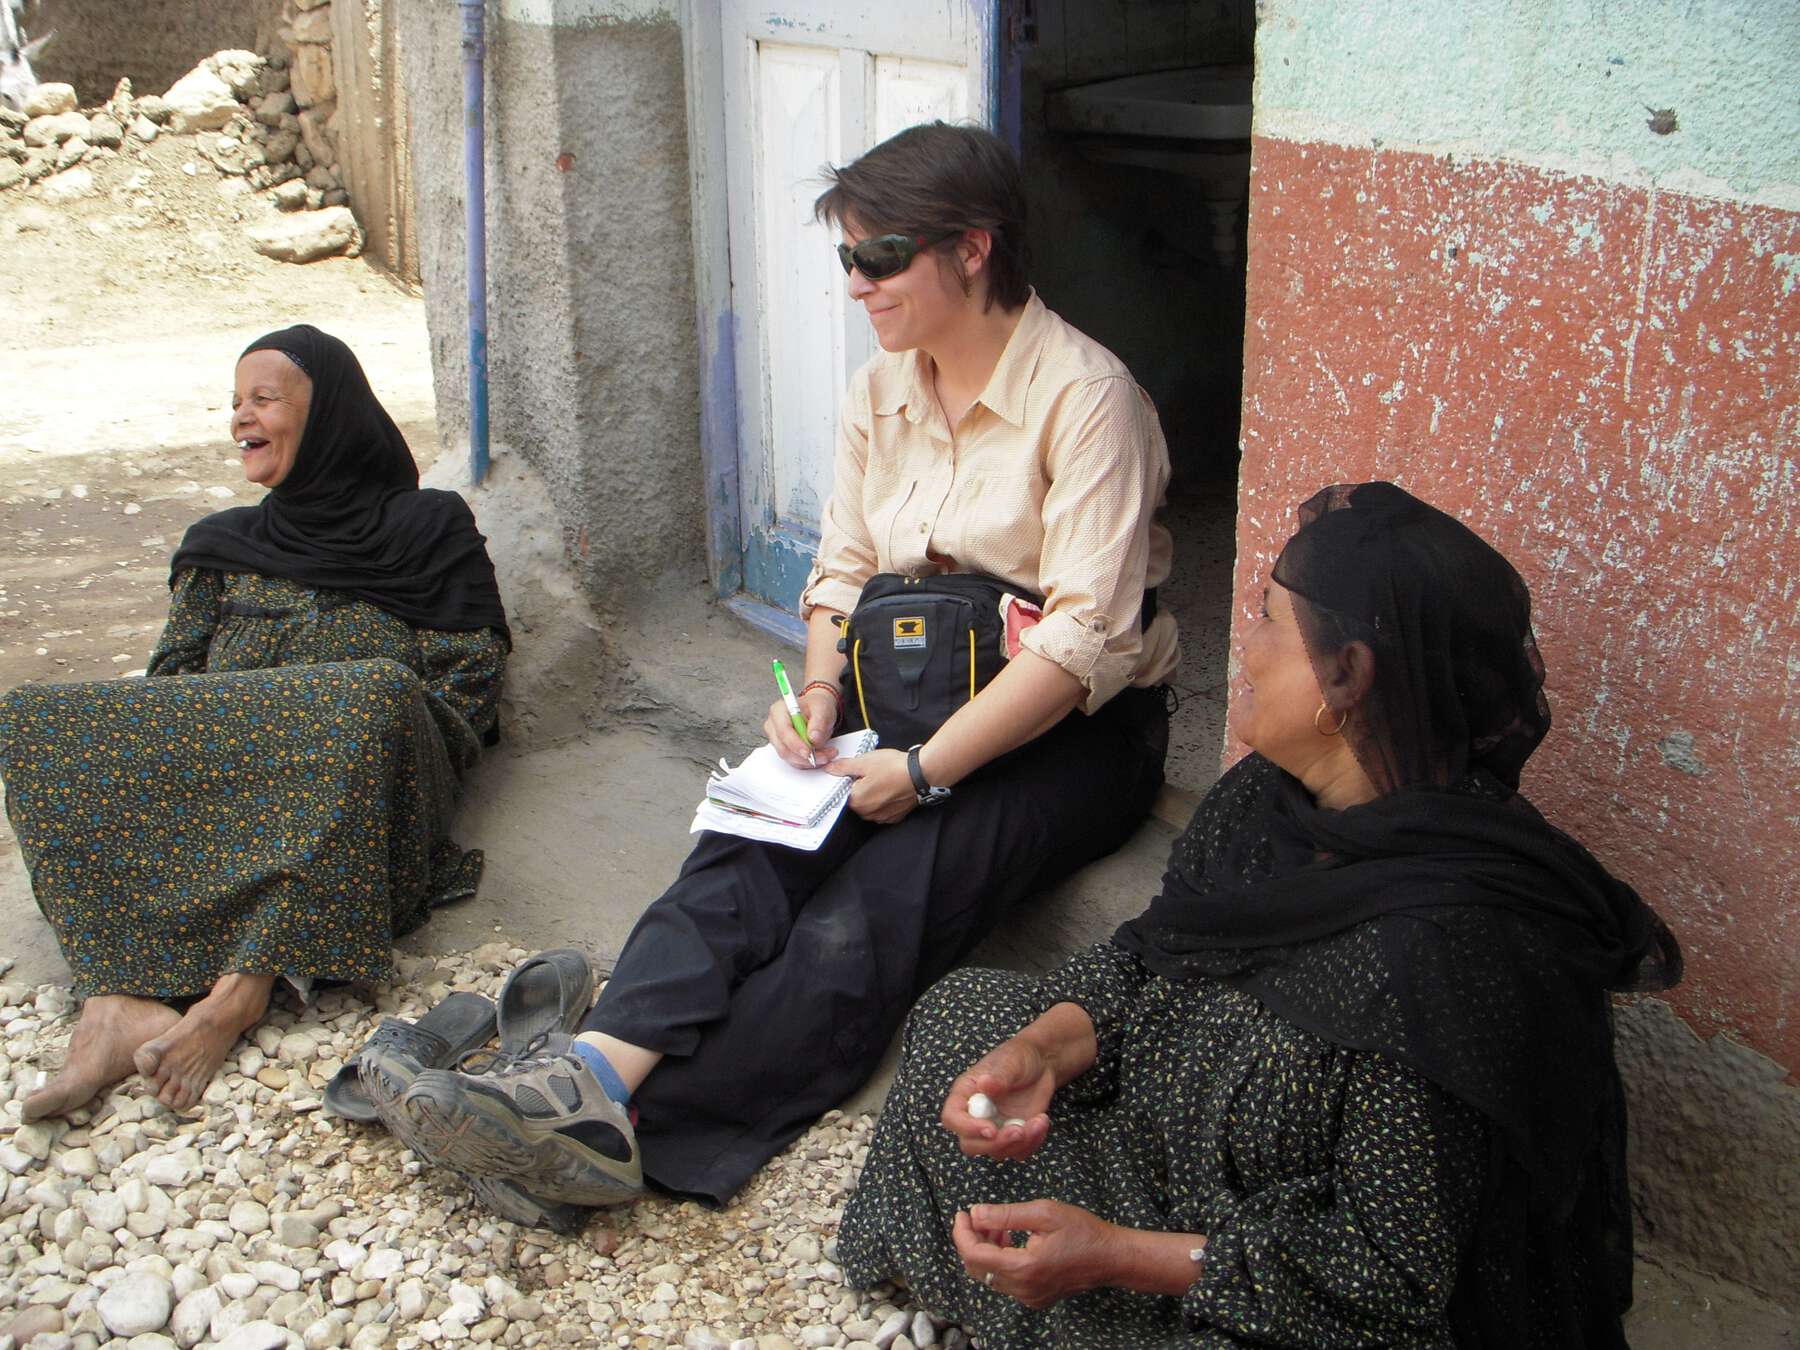 Three women smiling, the one in the middle is taking notes, while they all are sitting on the pebbled ground near a doorway.